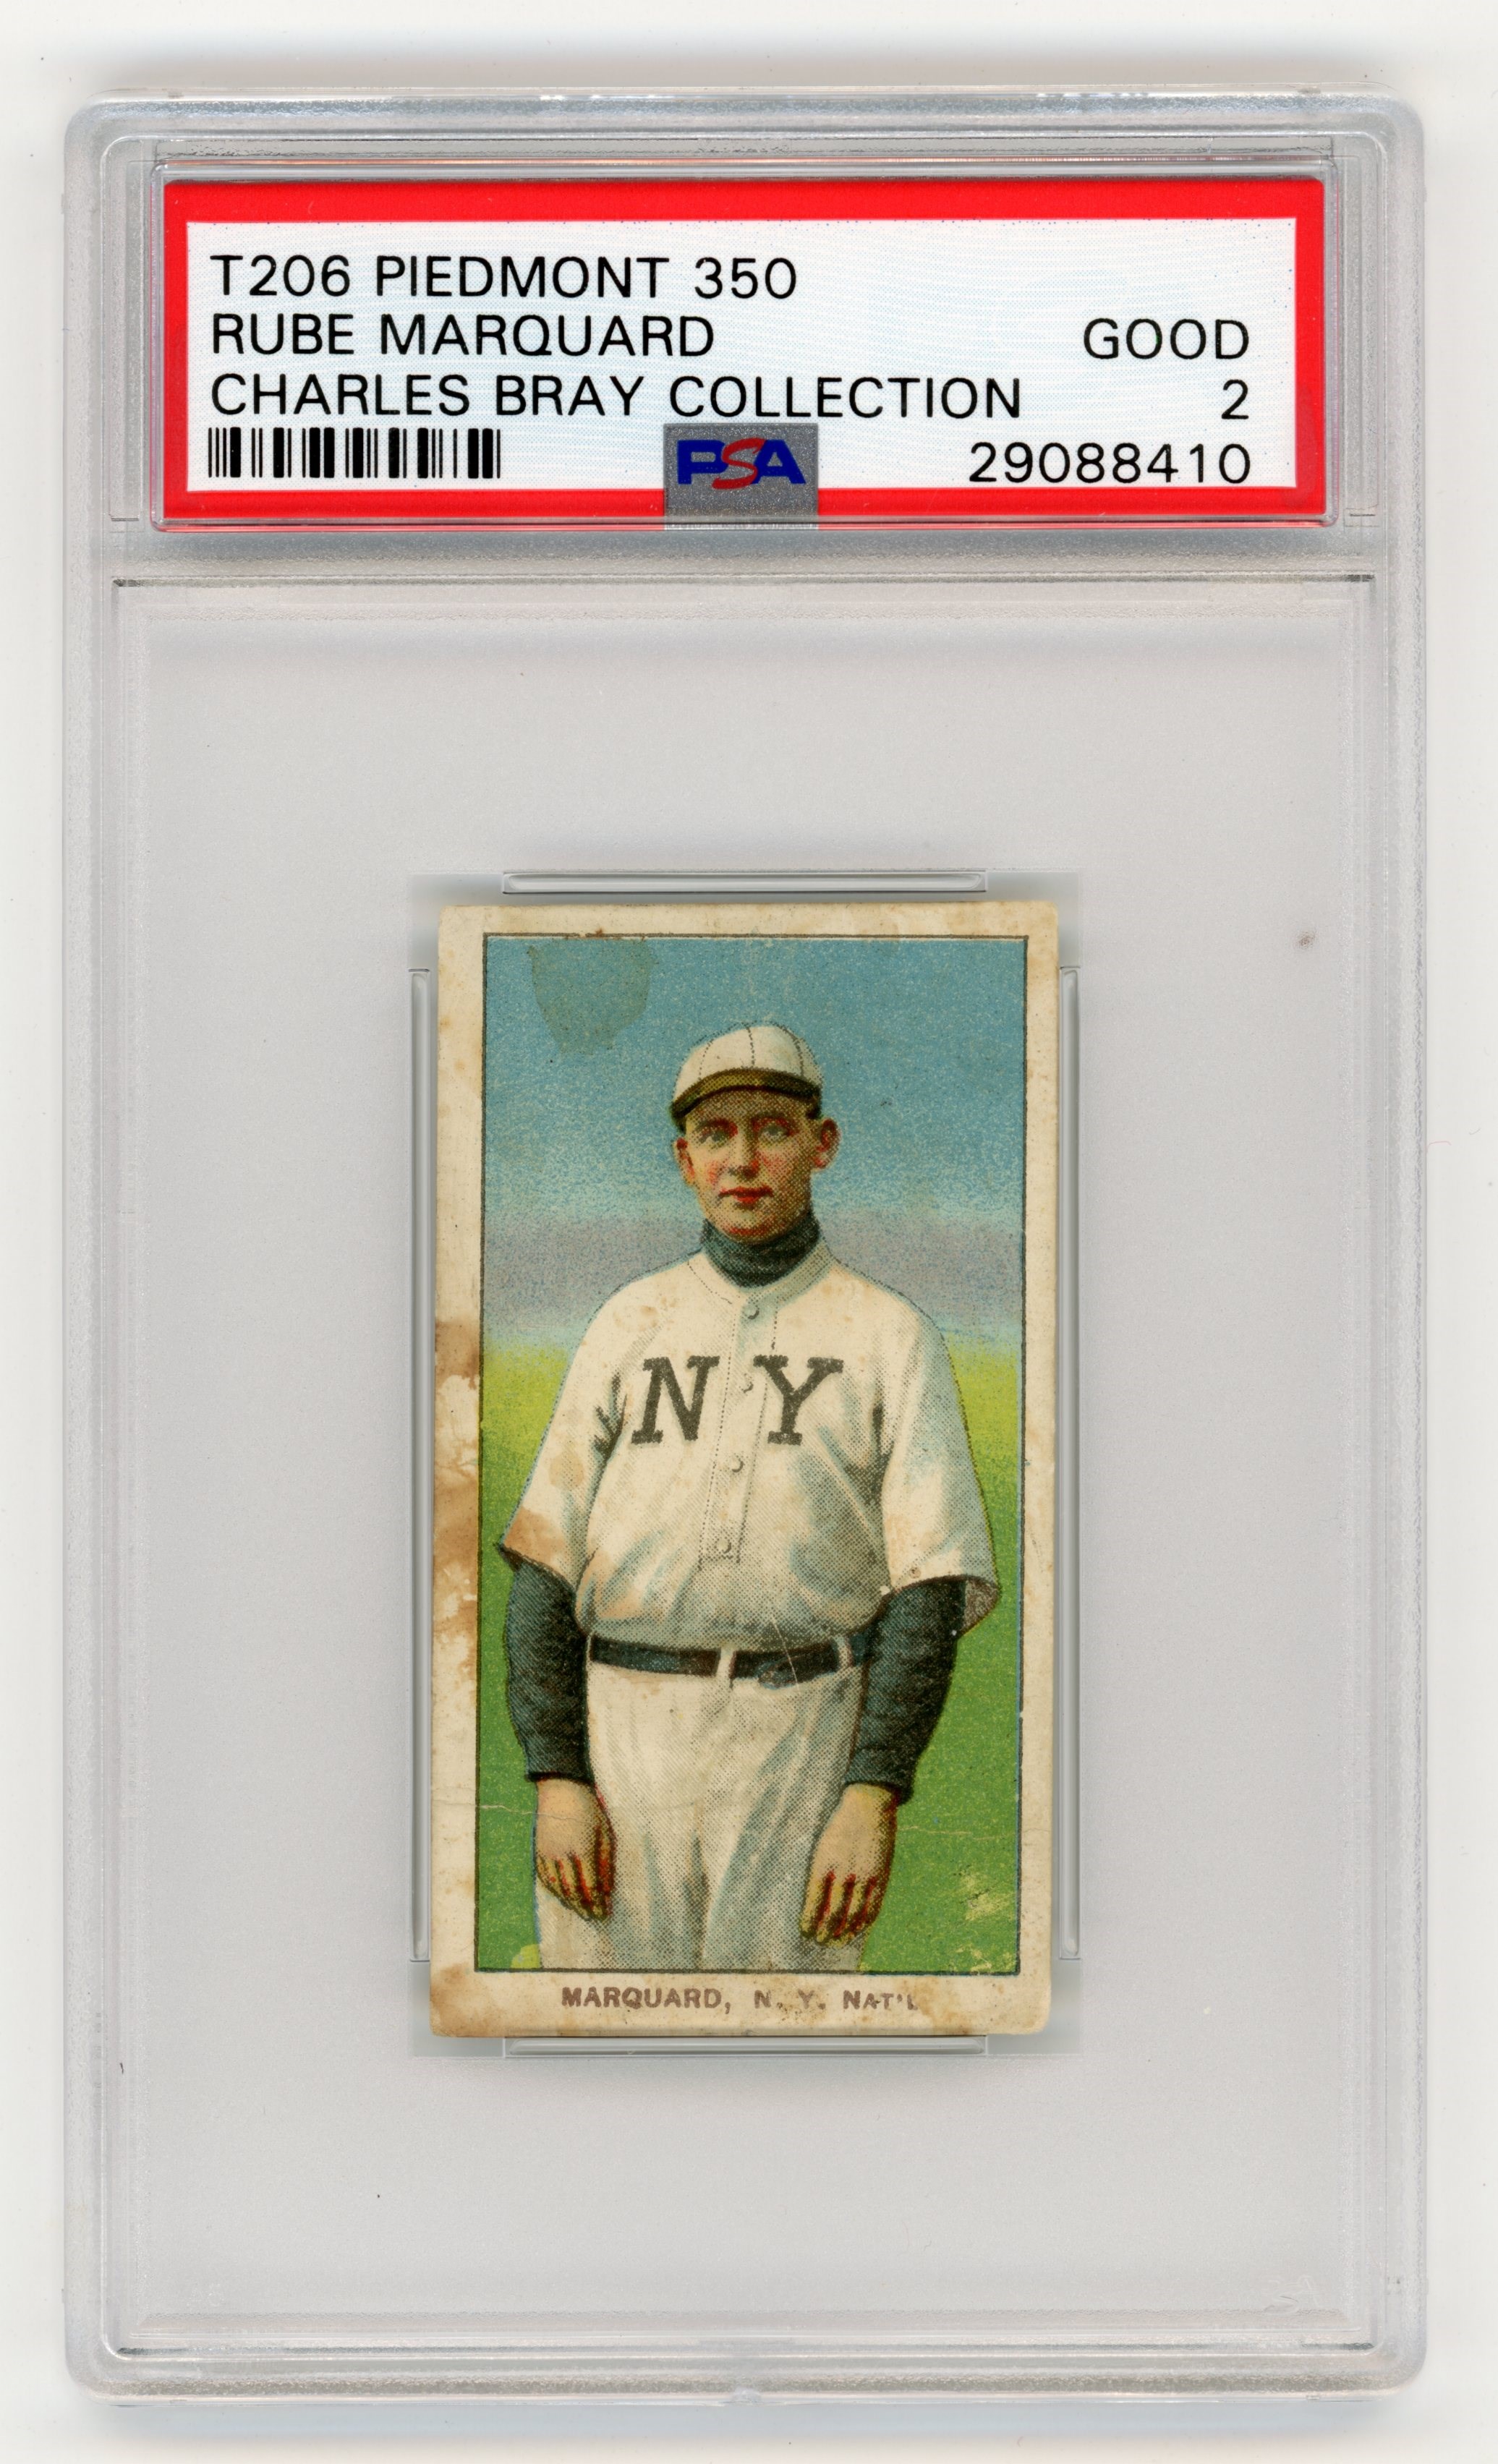 Baseball and Trading Cards - T206 Piedmont 350 Rube Marquard PSA 2 From Charles Bray Collection